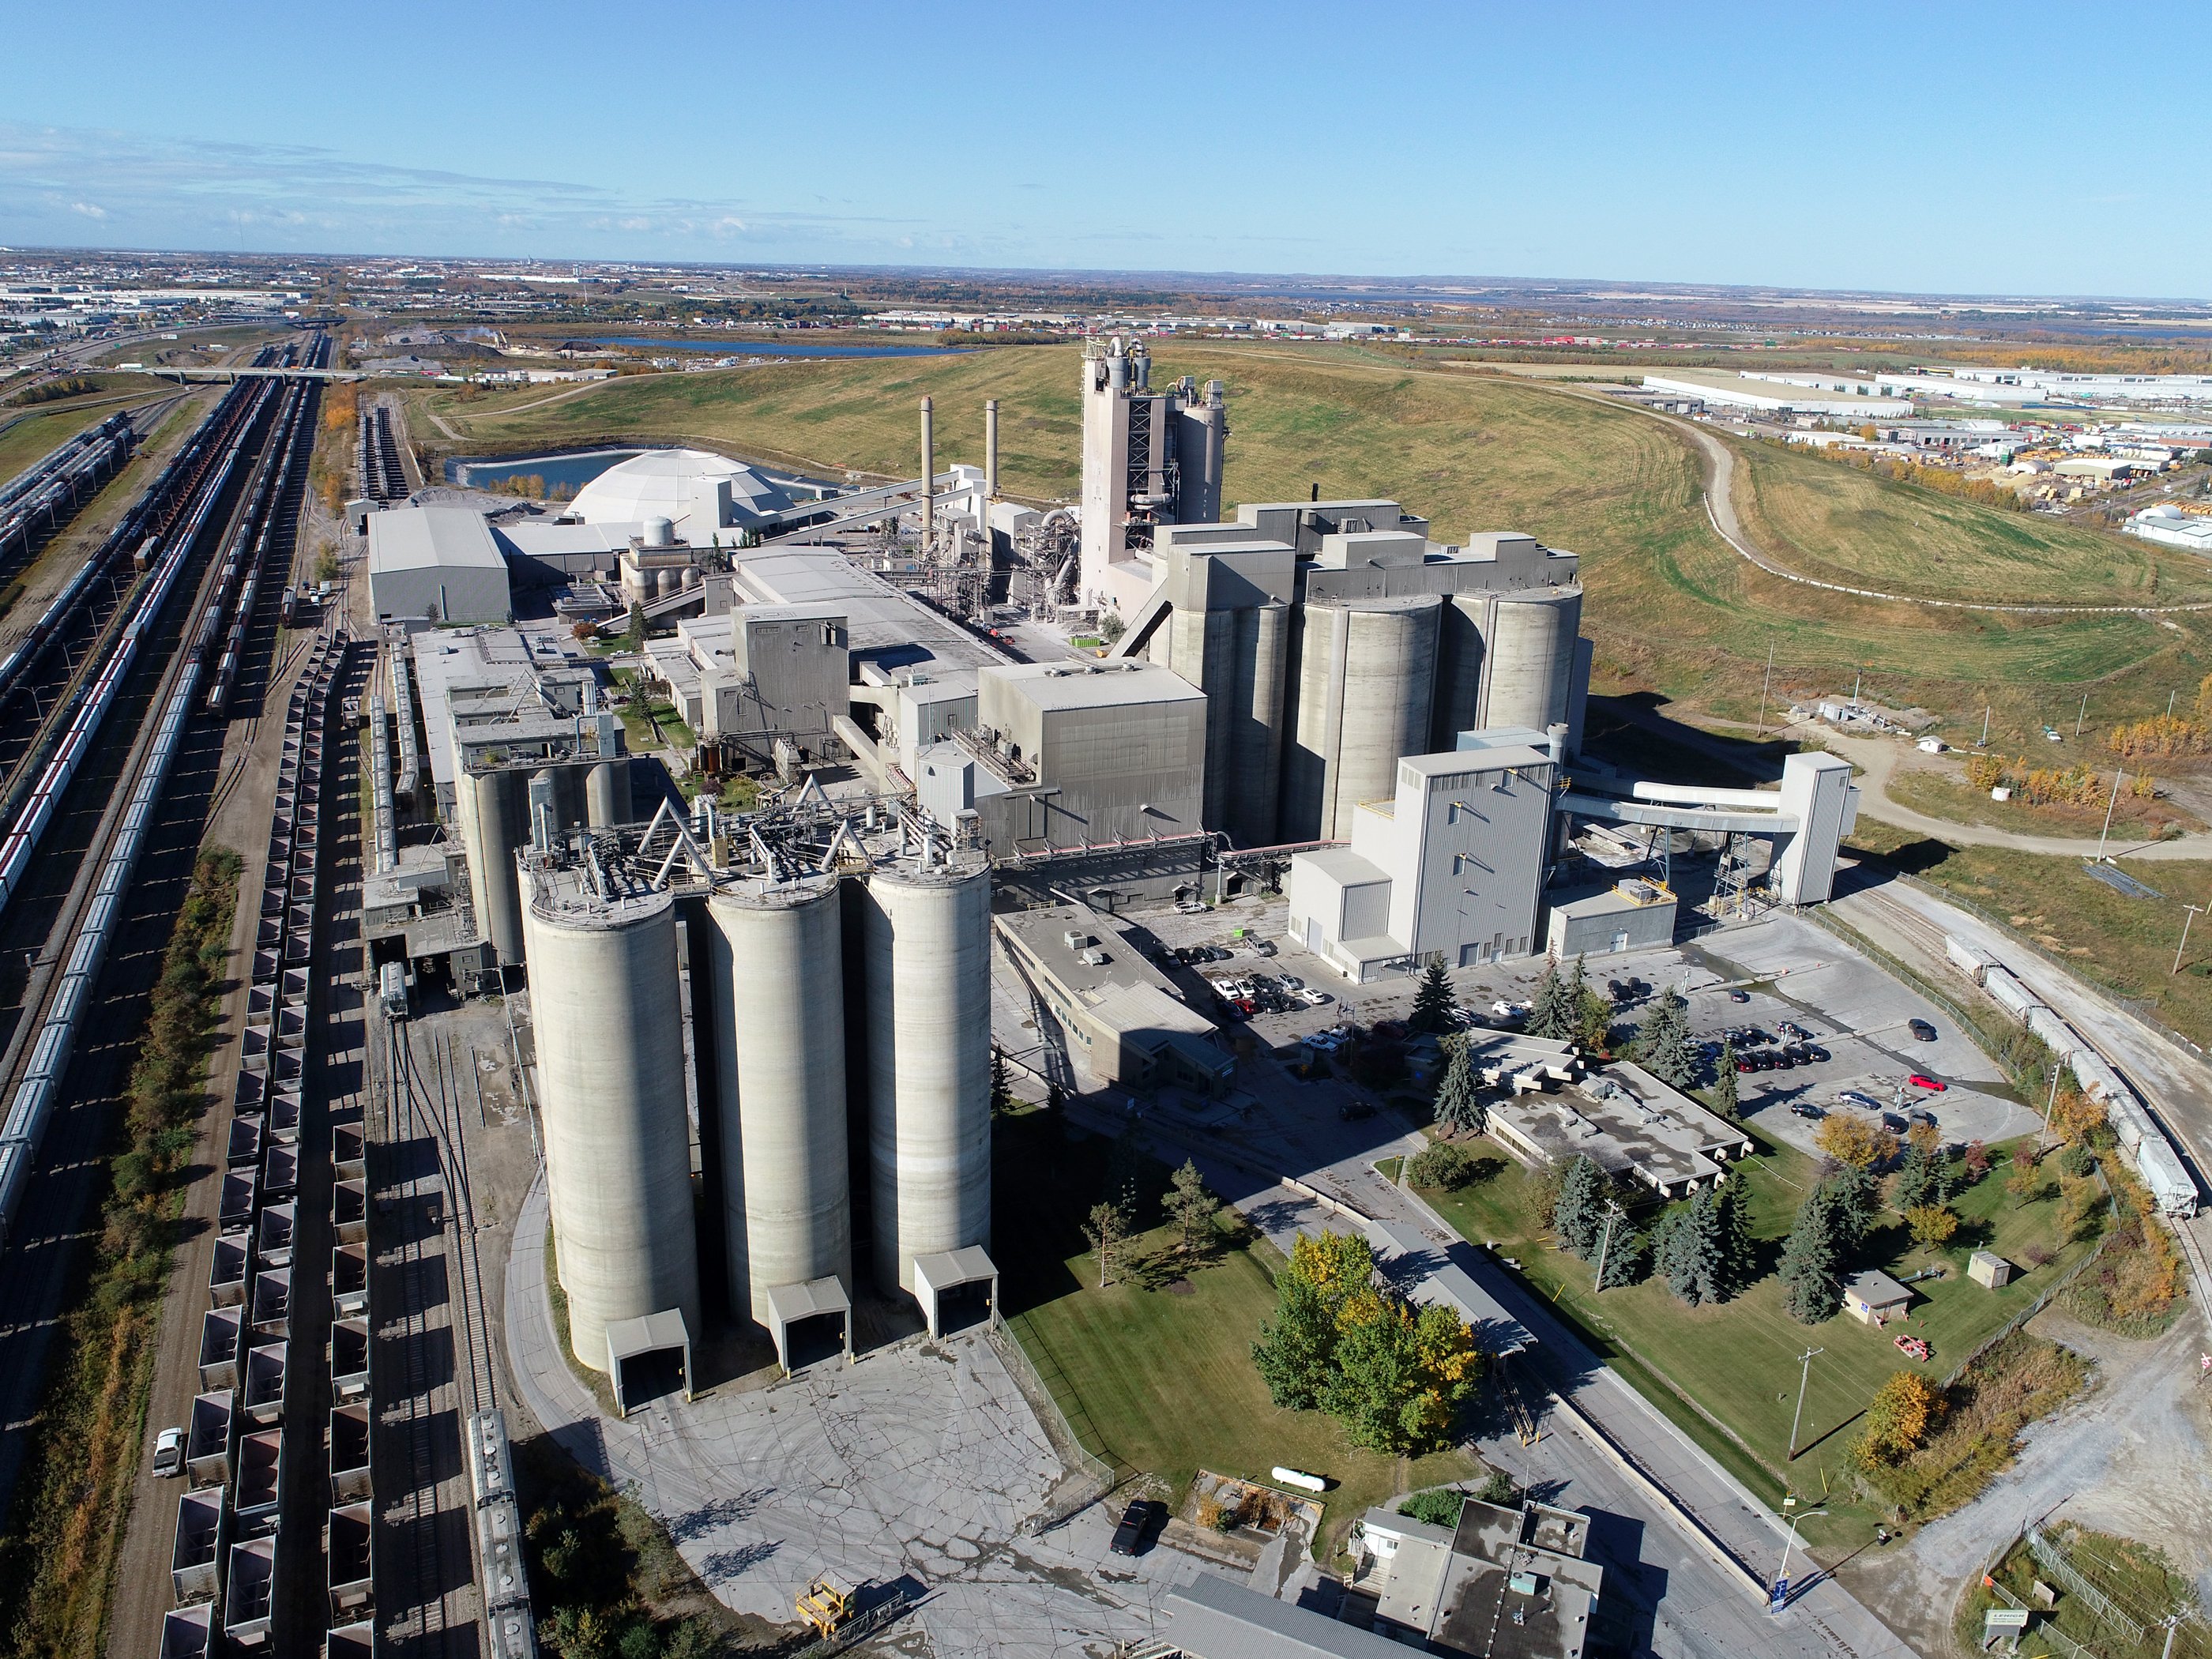 Drone footage of a cement plant